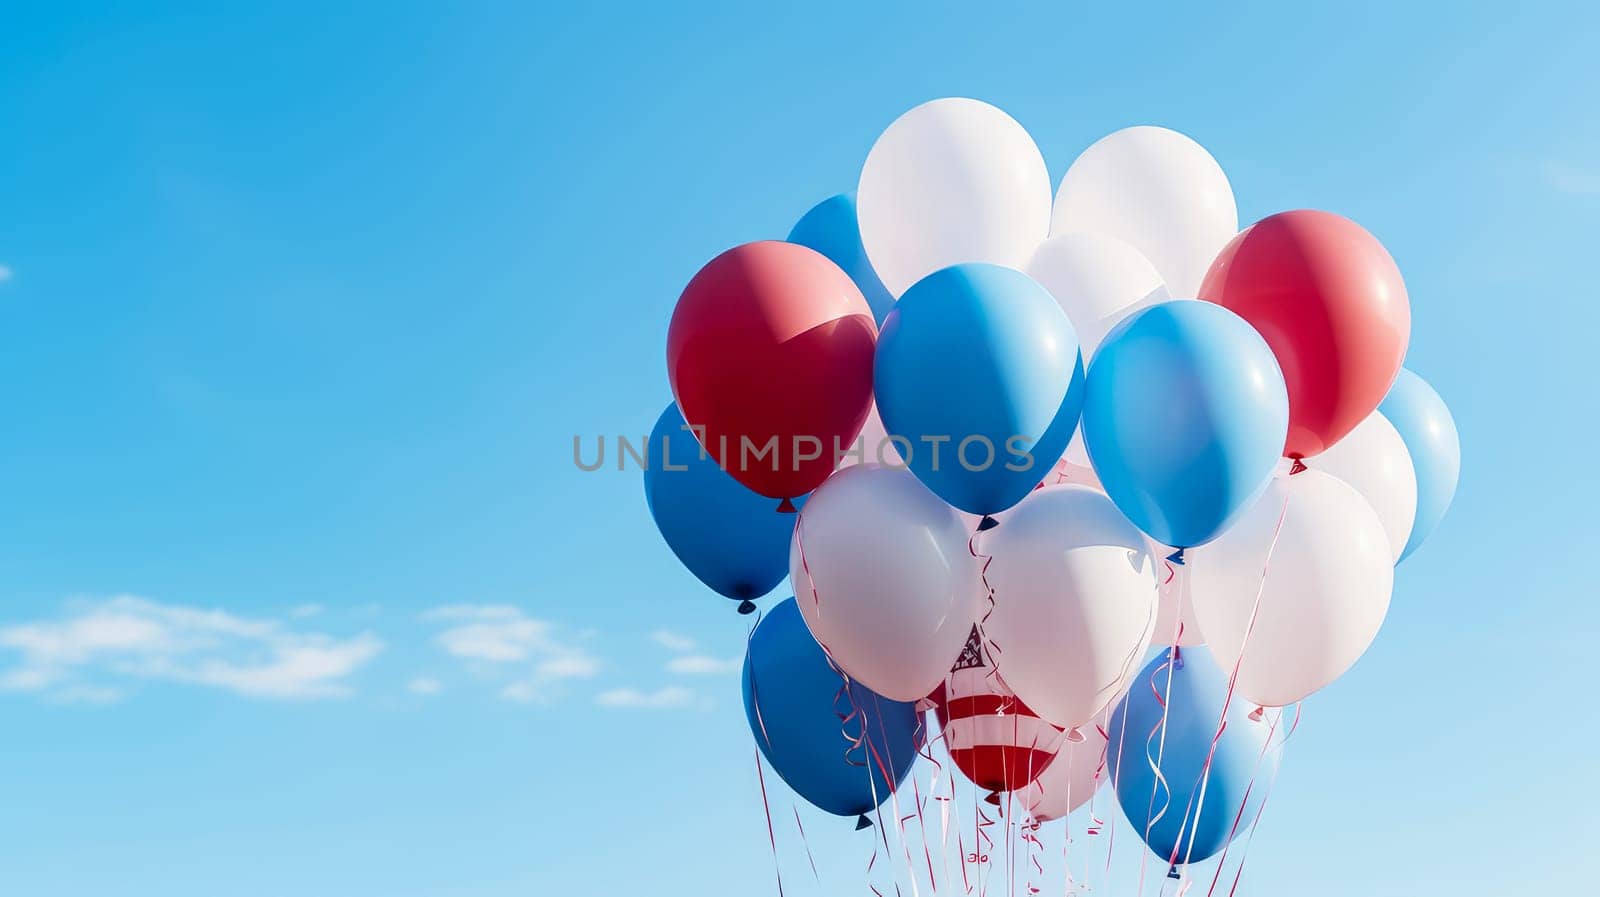 Balloons in the colors of the United States of America flag float against the blue sky. American President's Day, USA Independence Day, American flag colors background, 4 July, February holiday, stars and stripes, red and blue